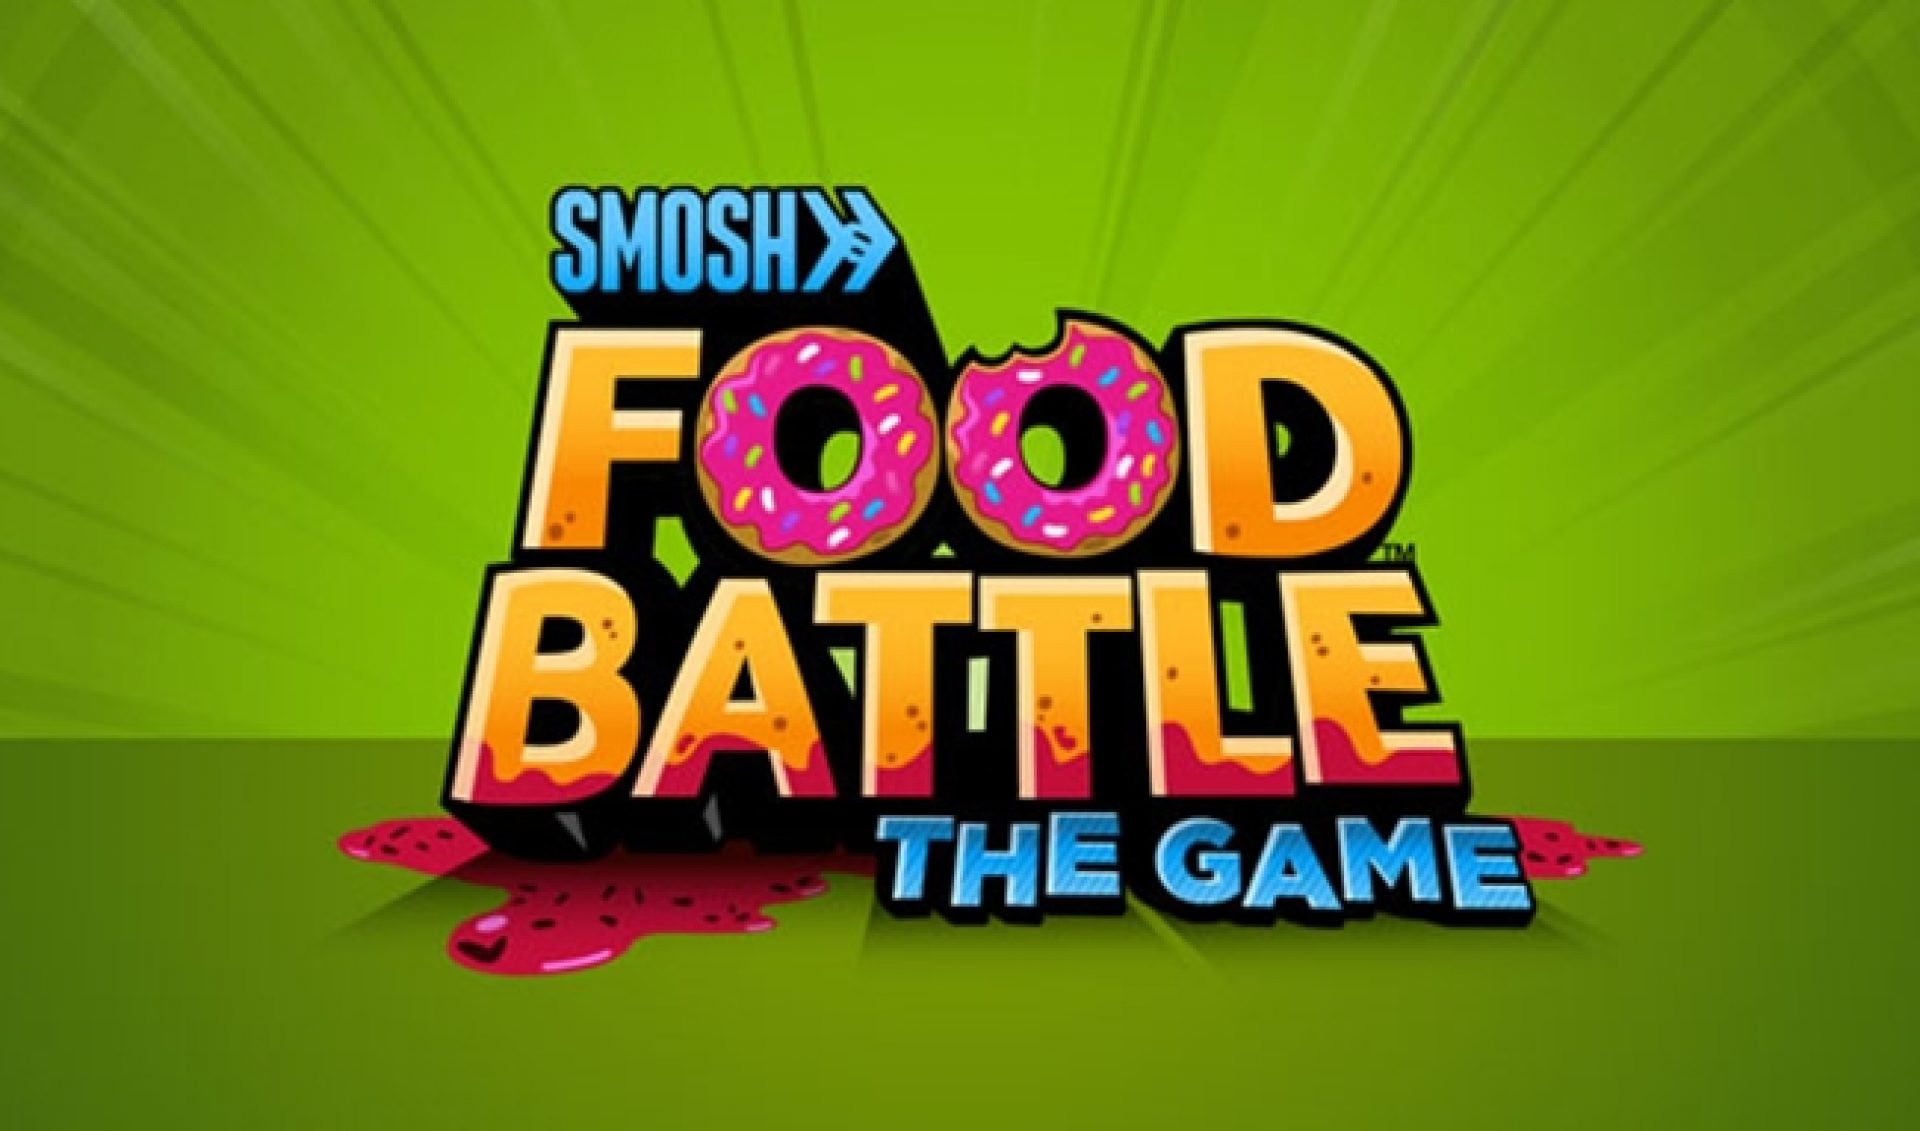 Smosh’s ‘Food Battle’ Video Game Now Available On iOS, Android